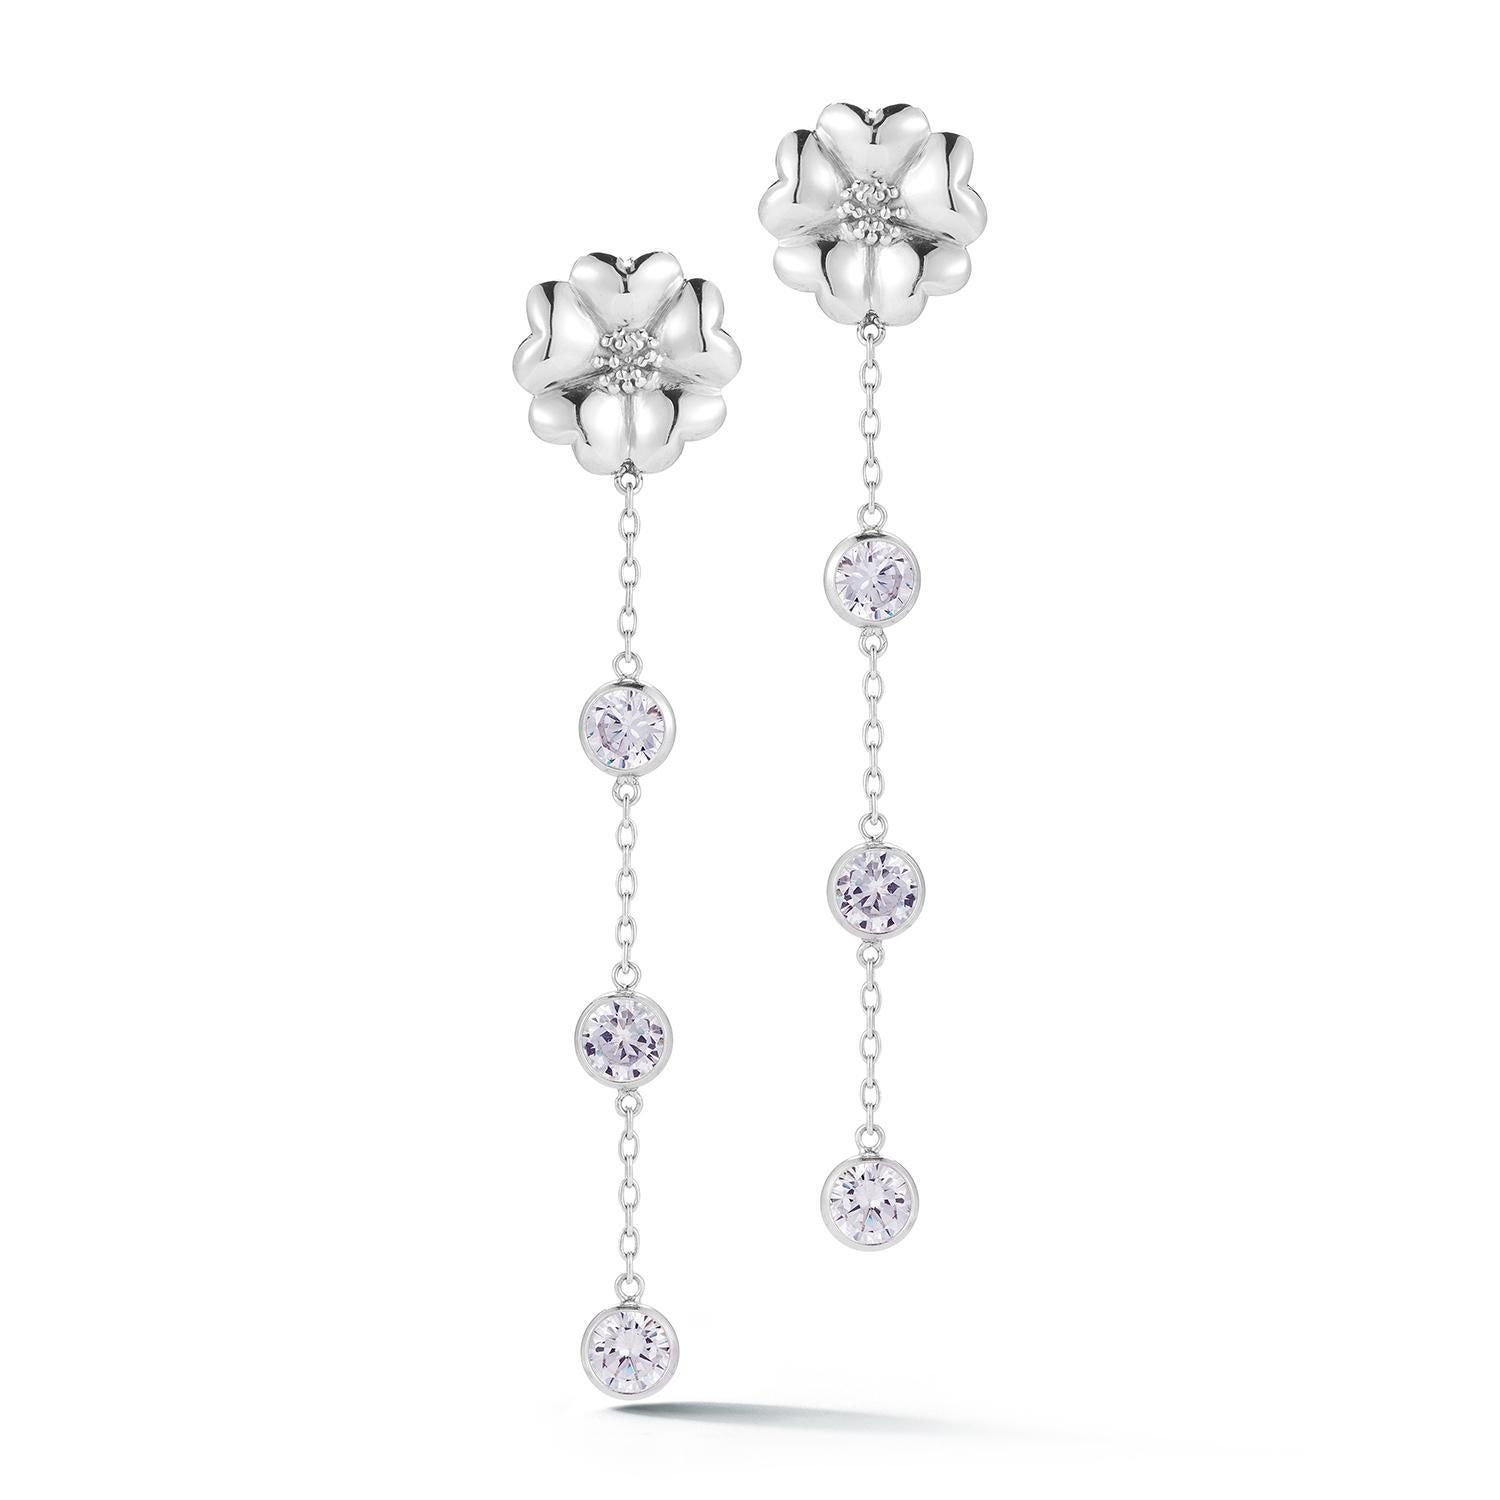 Designed in NYC

.925 Sterling Silver 6 x 6 mm Amethyst Triple Stone Drop Blossom Earrings. No matter the season, allow natural beauty to surround you wherever you go. Triple stone drop blossom earrings: 

Sterling silver 
High-polish